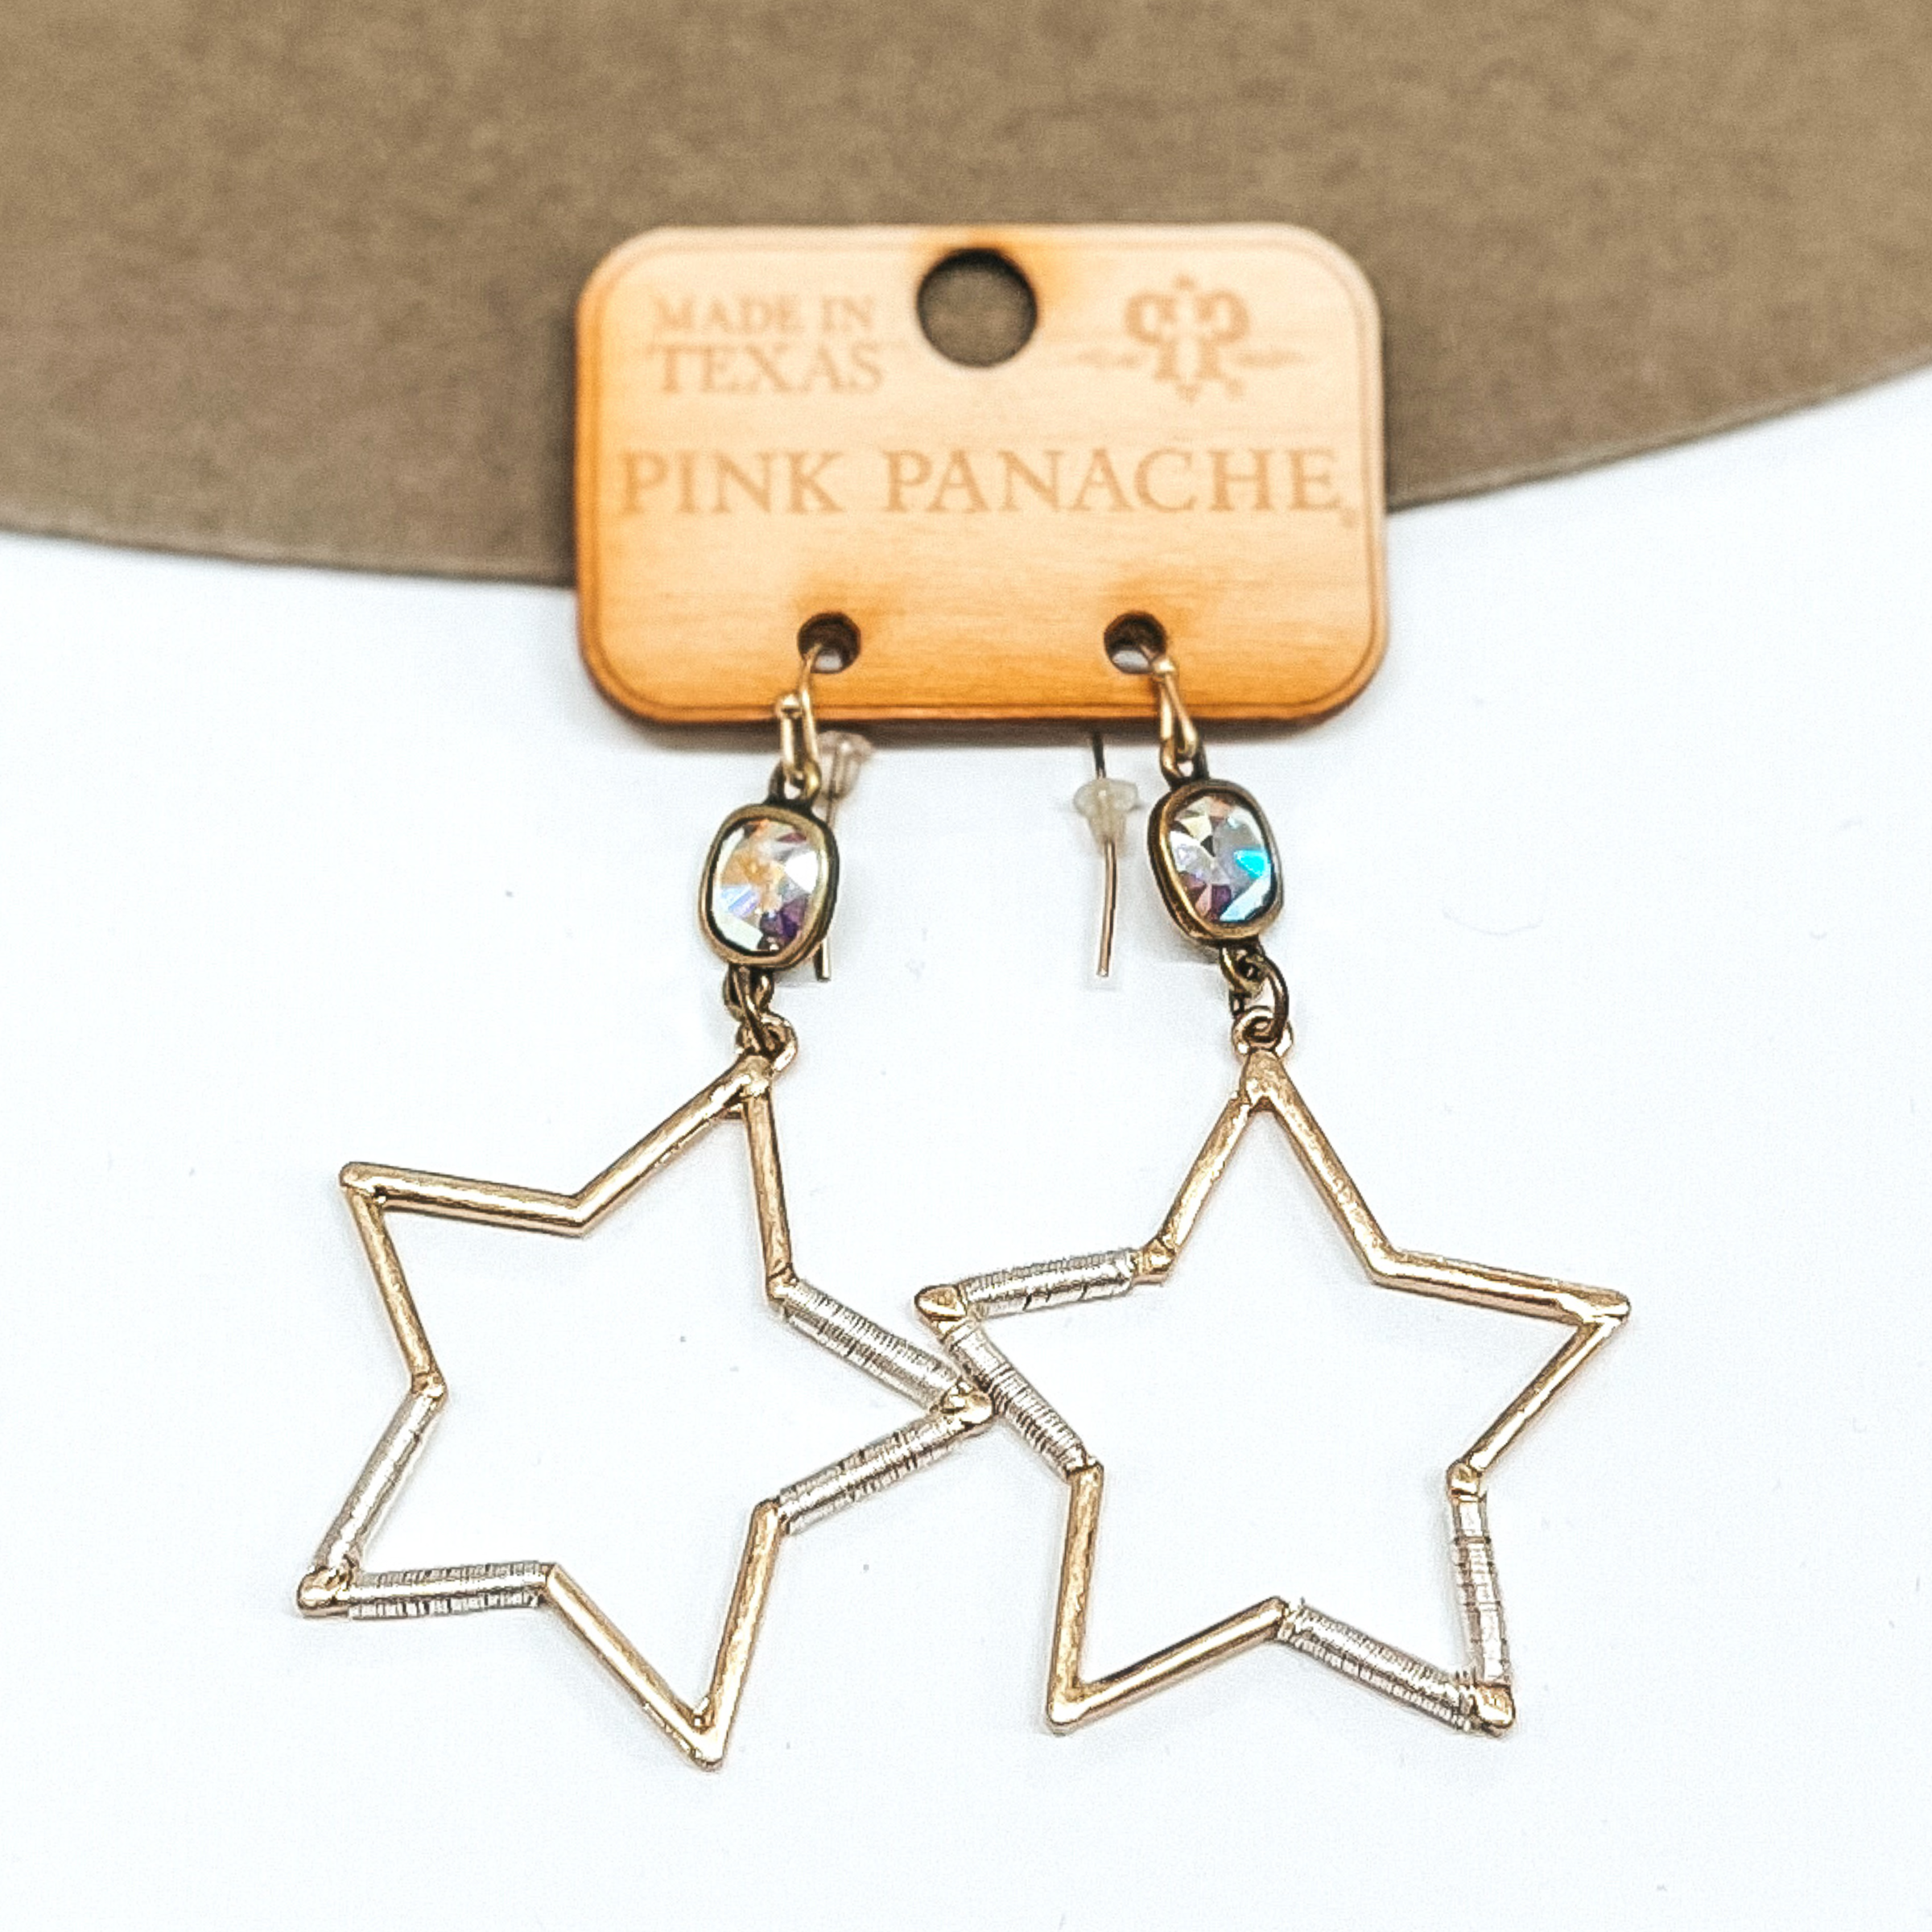 AB cushion cut crystals that are in a bronze settings and are connected to bronze fish hook earrings. Hanging from the crystals are gold open star pendant with silver wire wrapping around a few sides. These earrings are pictured on a tan and white background.